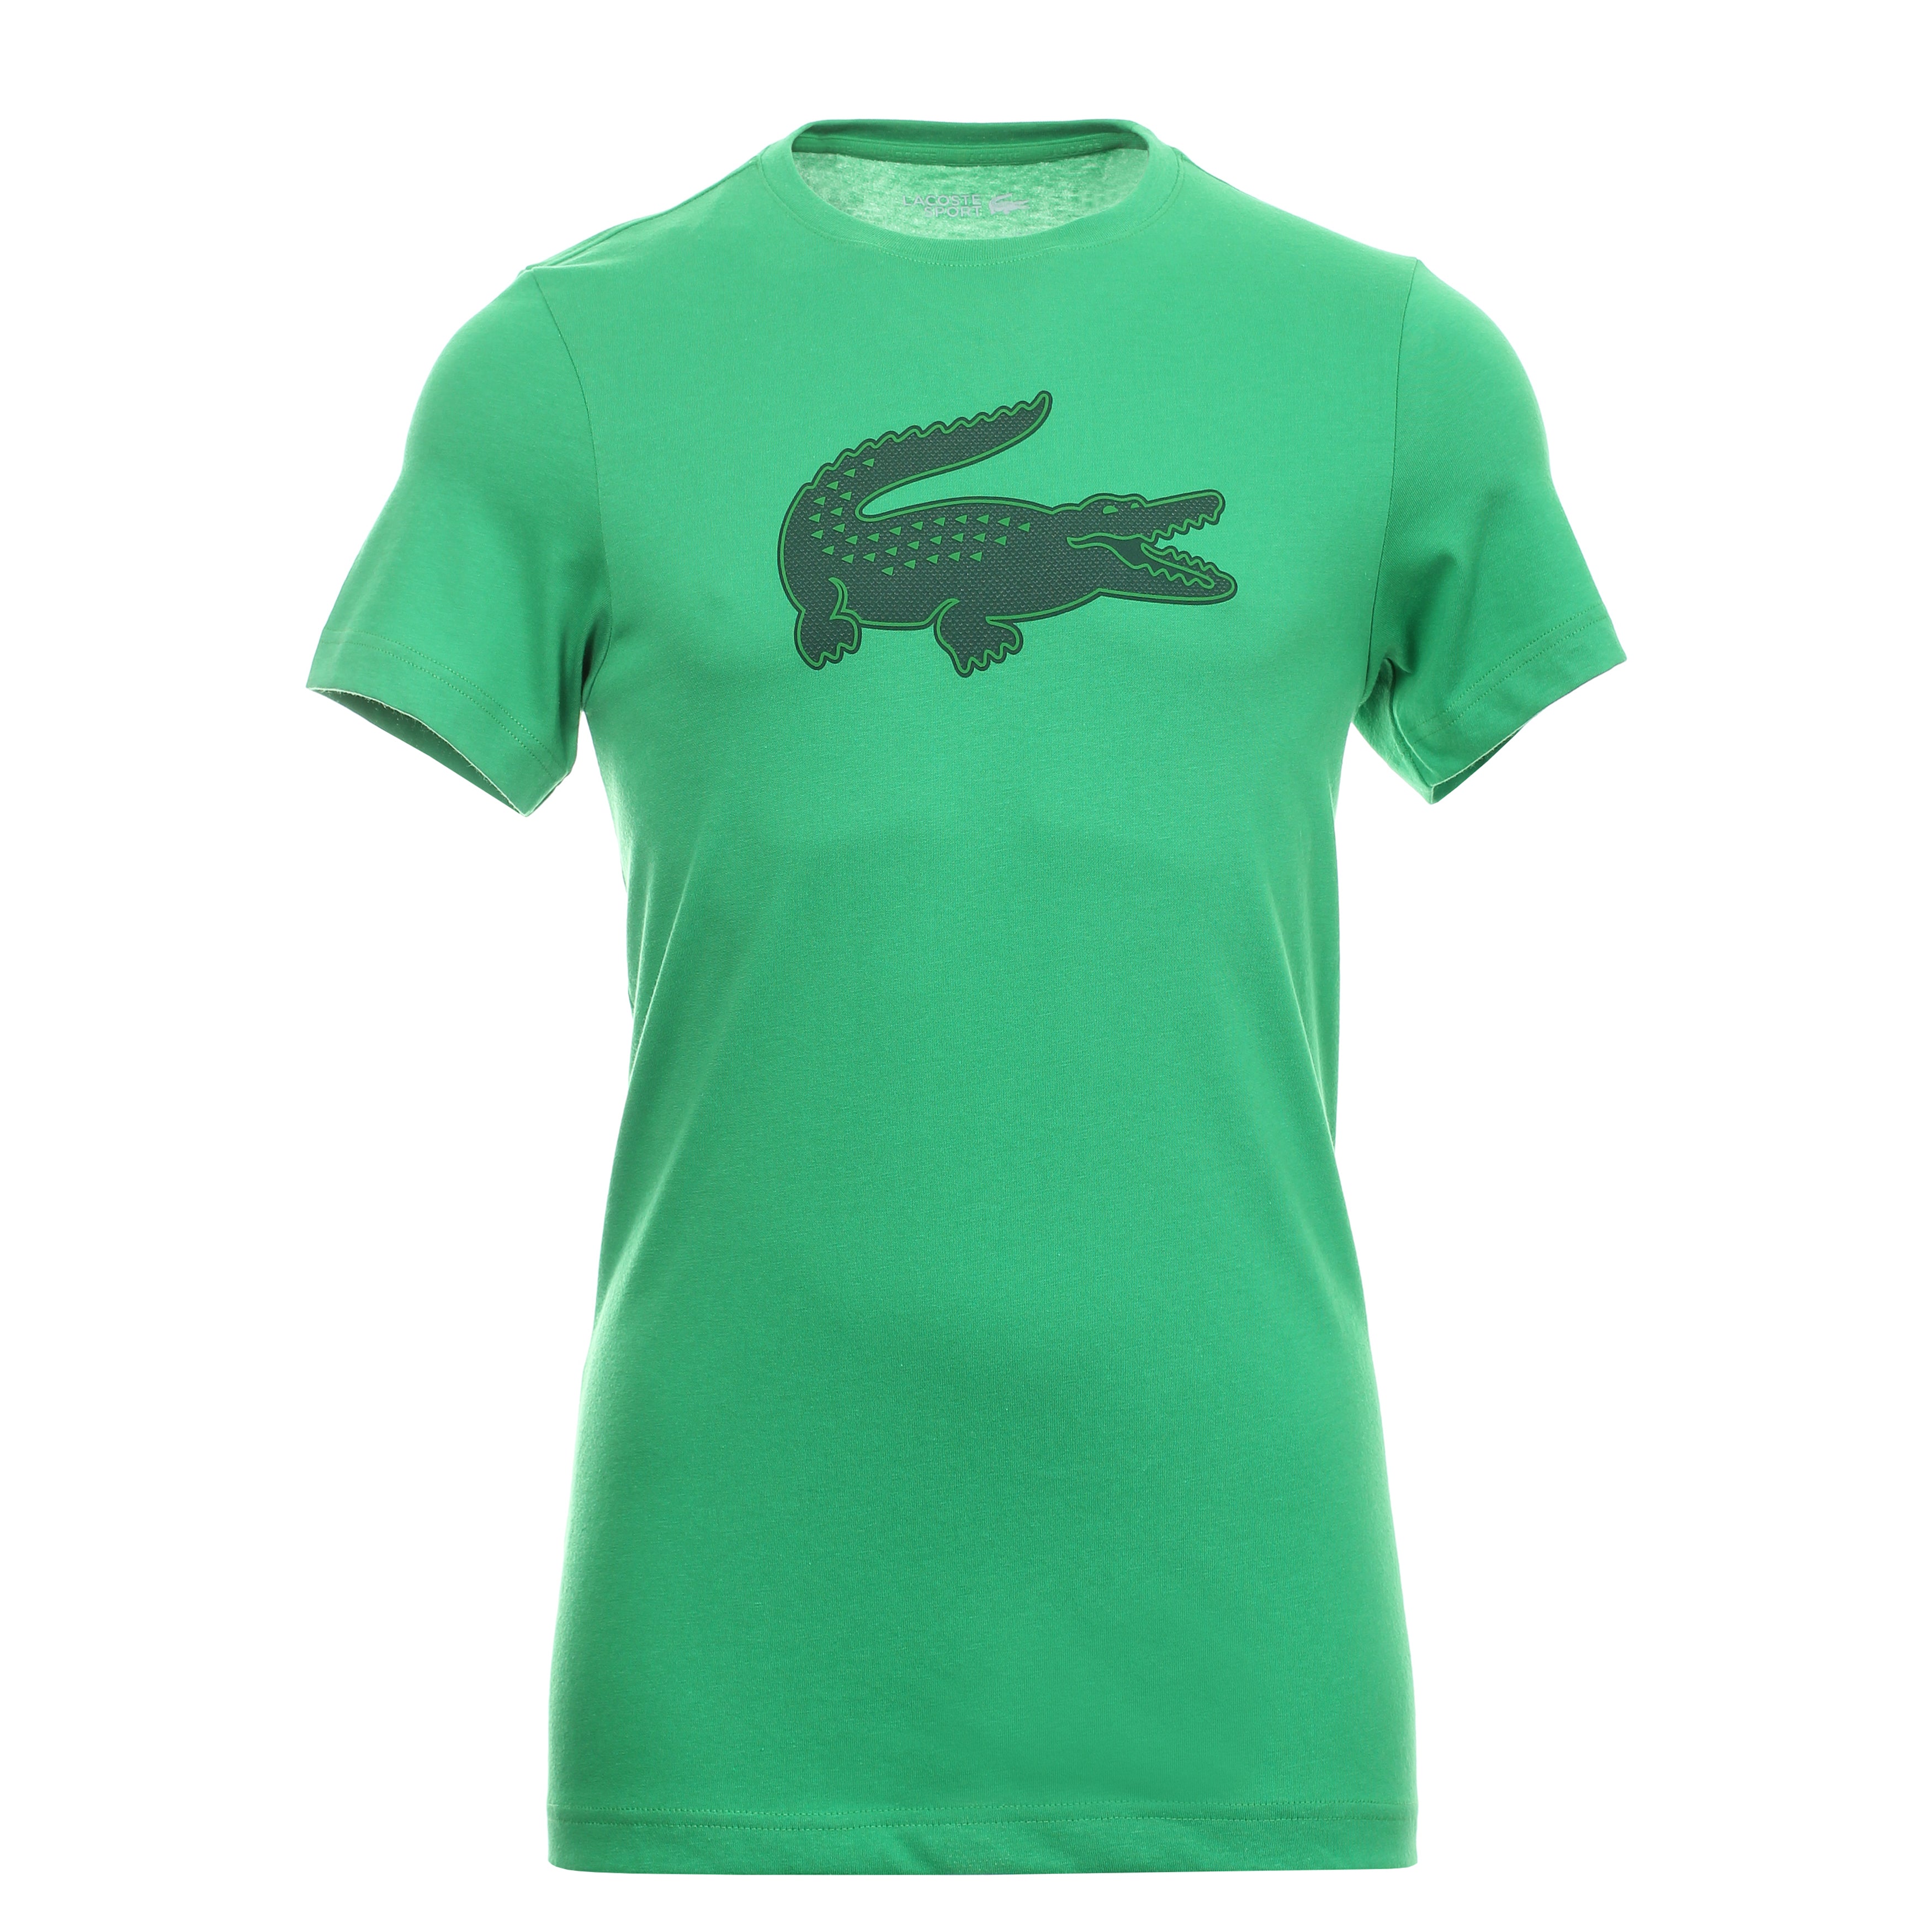 Lacoste Large Croc Print Tee Shirt TH2042 Green 42T | Function18